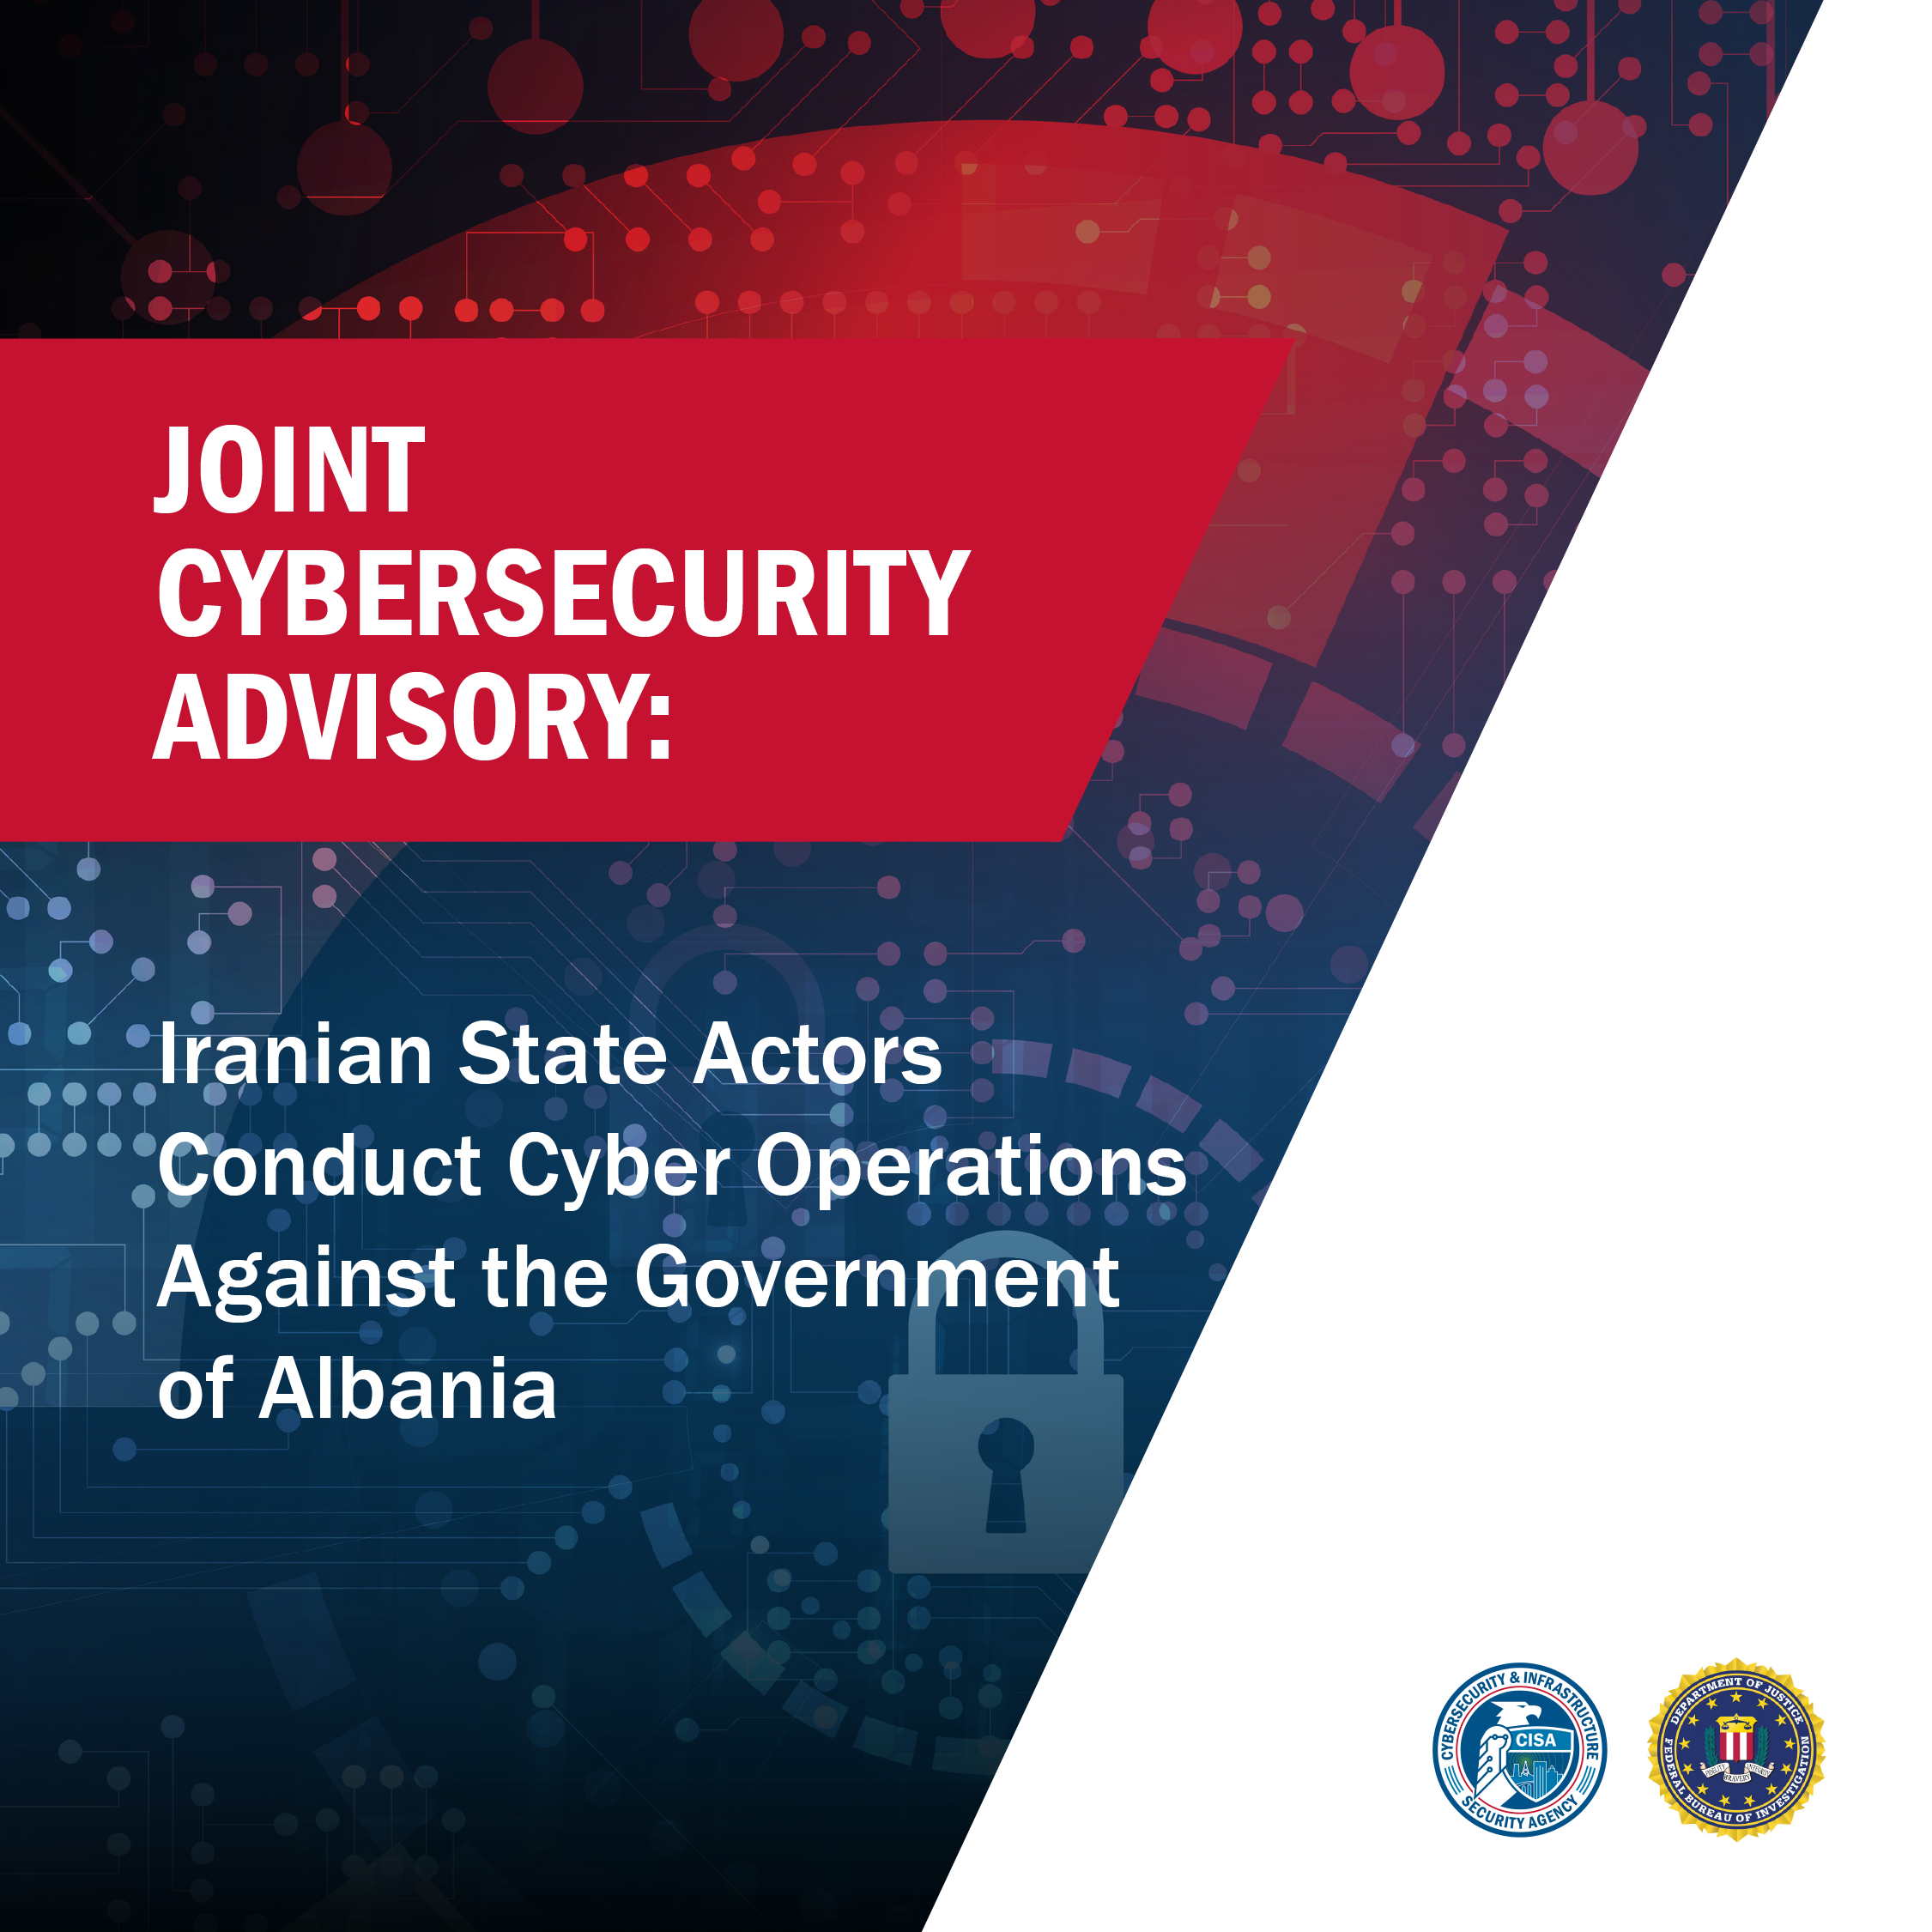 Joint Cybersecurity Advisory: Iranian State Actors Conduct Cyber Operations Against the Government of Albania